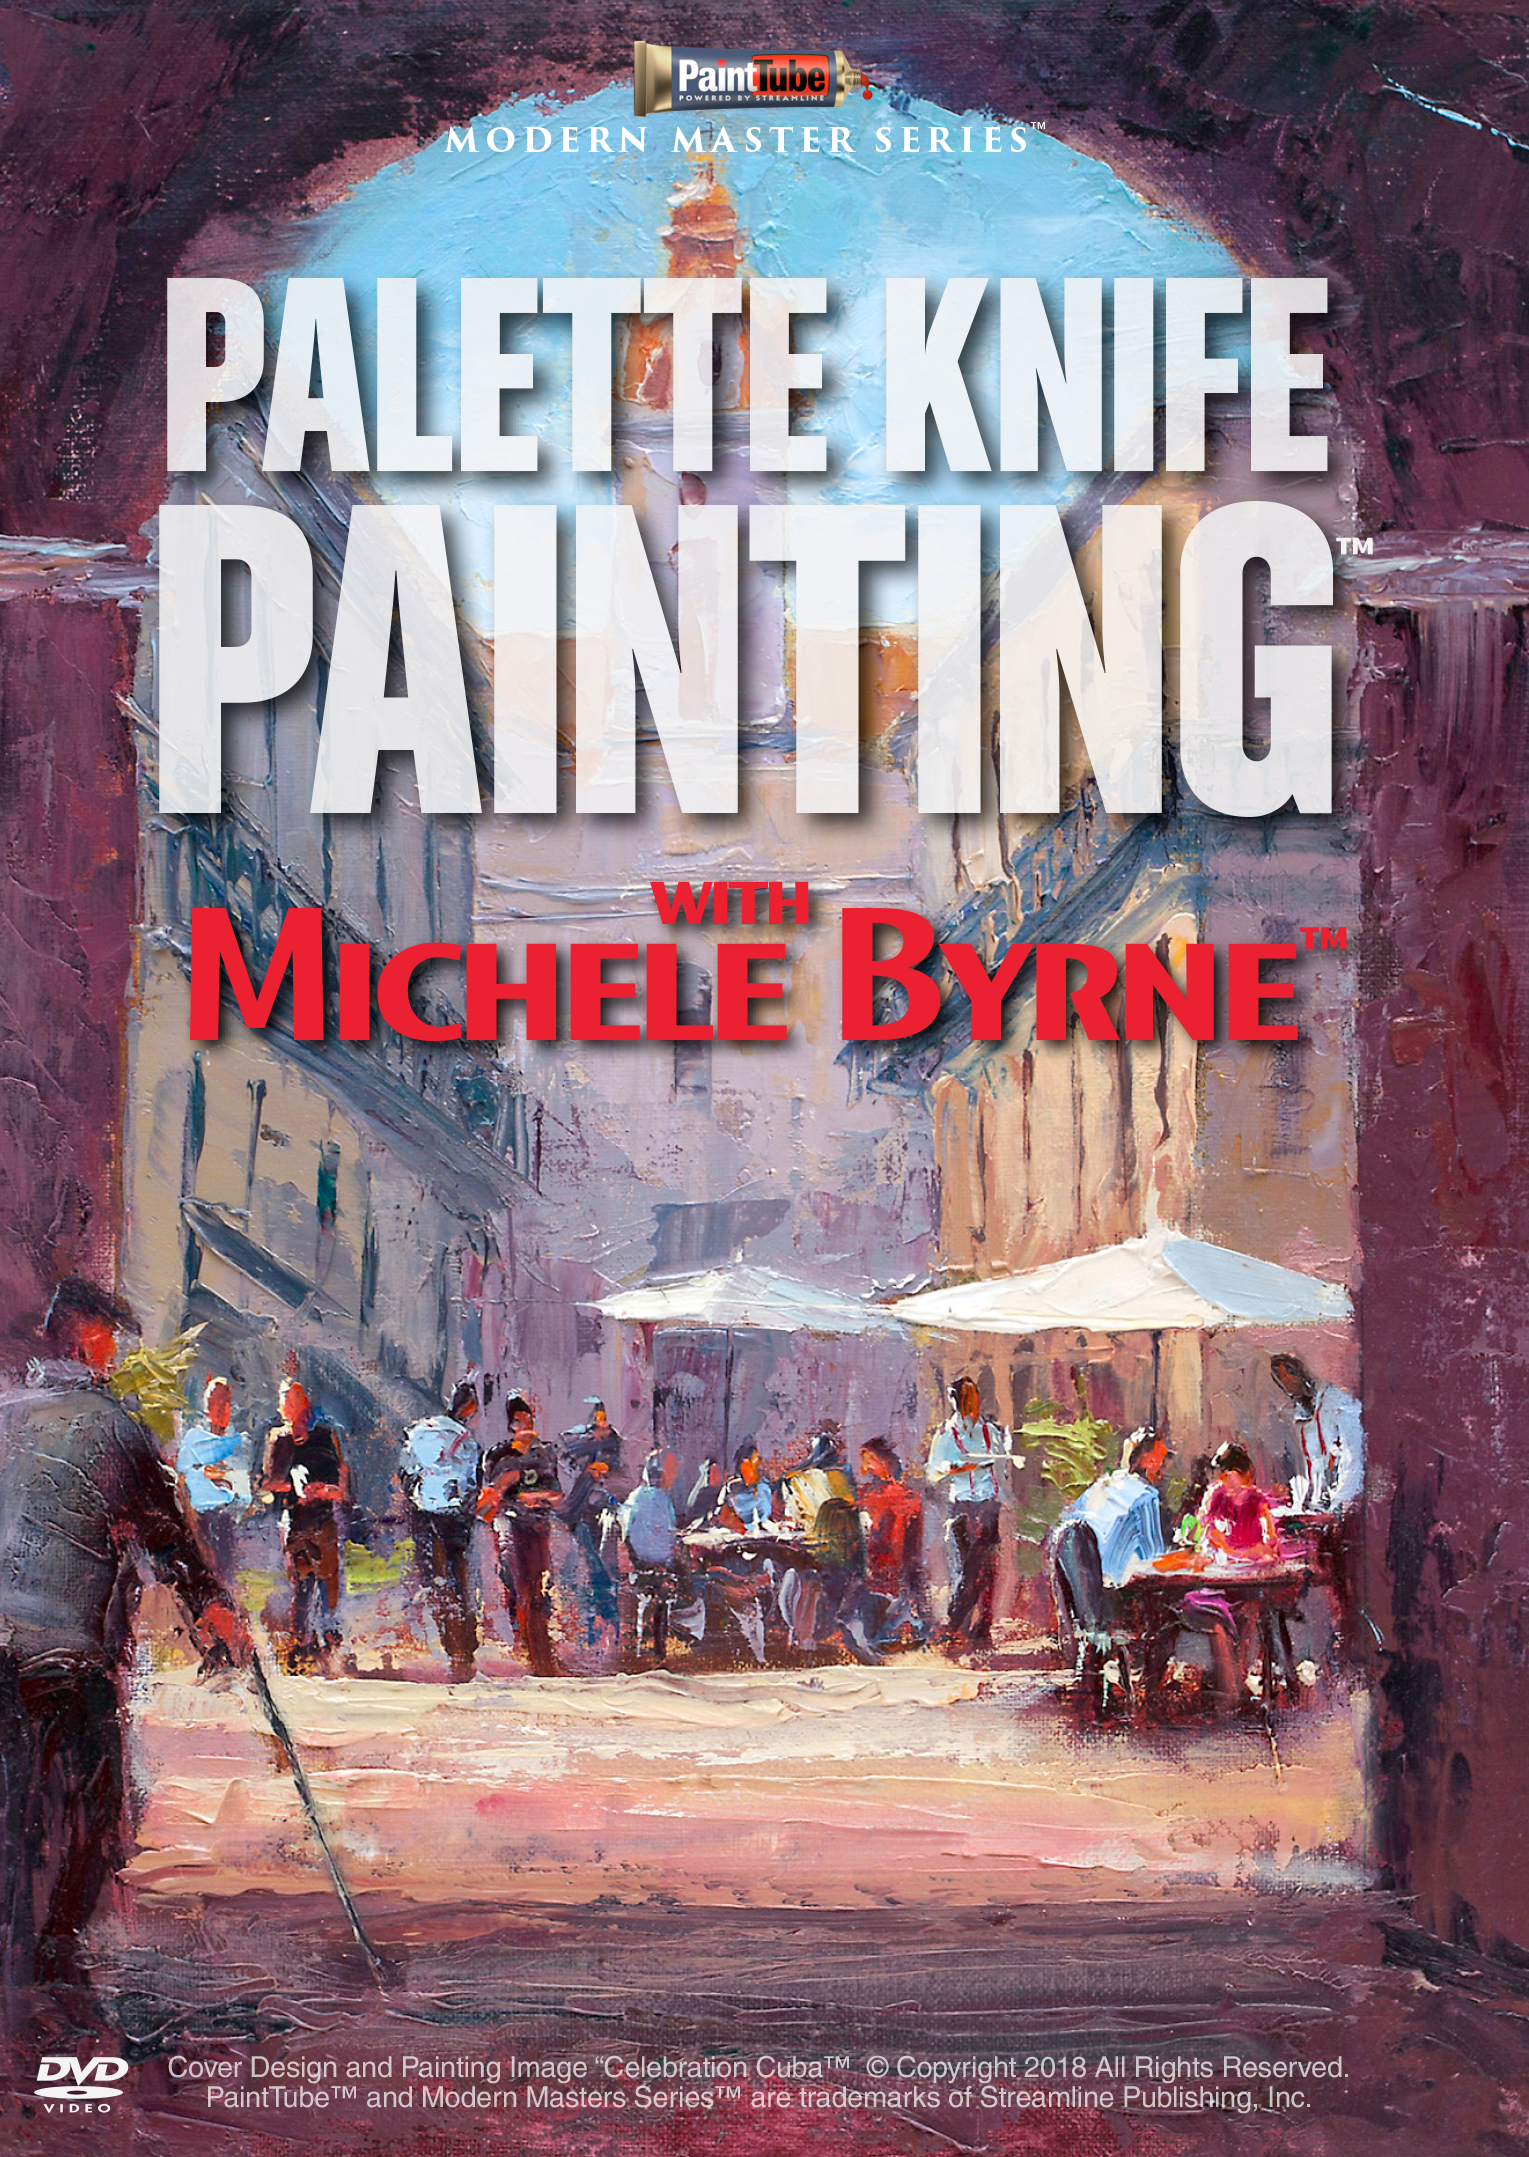 Michele Byrne: Palette Knife Painting